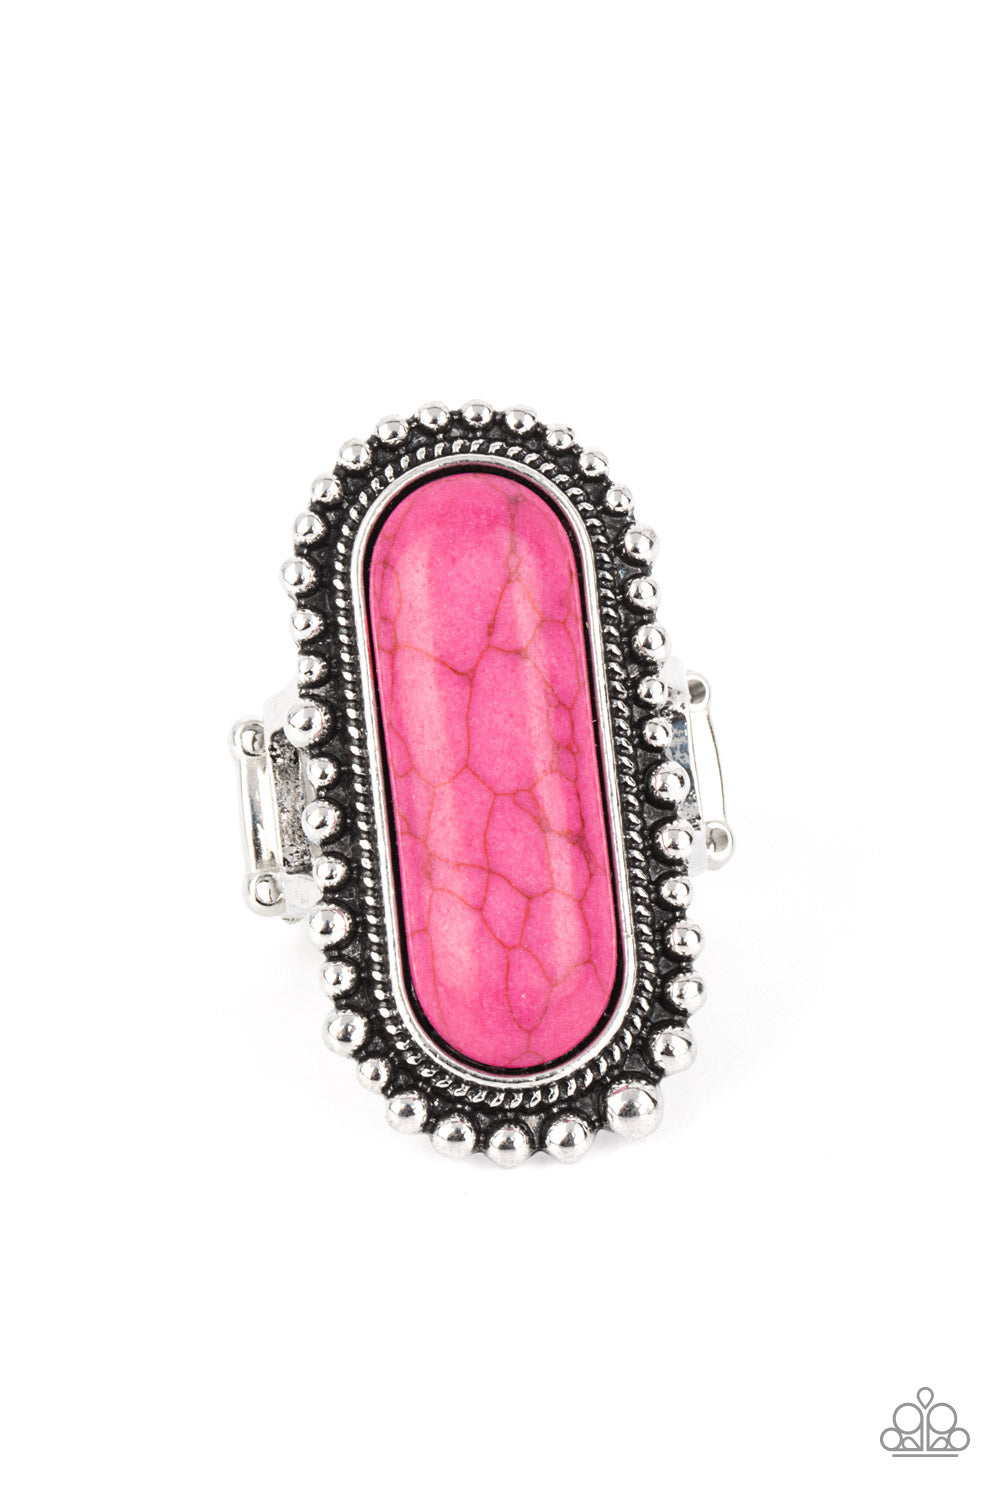 Sedona Scene Pink Ring - Paparazzi Accessories  An oblong pink stone is nestled inside an oversized studded silver frame, creating a colorfully rustic centerpiece atop the finger. Features a stretchy band for a flexible fit.  All Paparazzi Accessories are lead free and nickel free!  Sold as one individual ring.